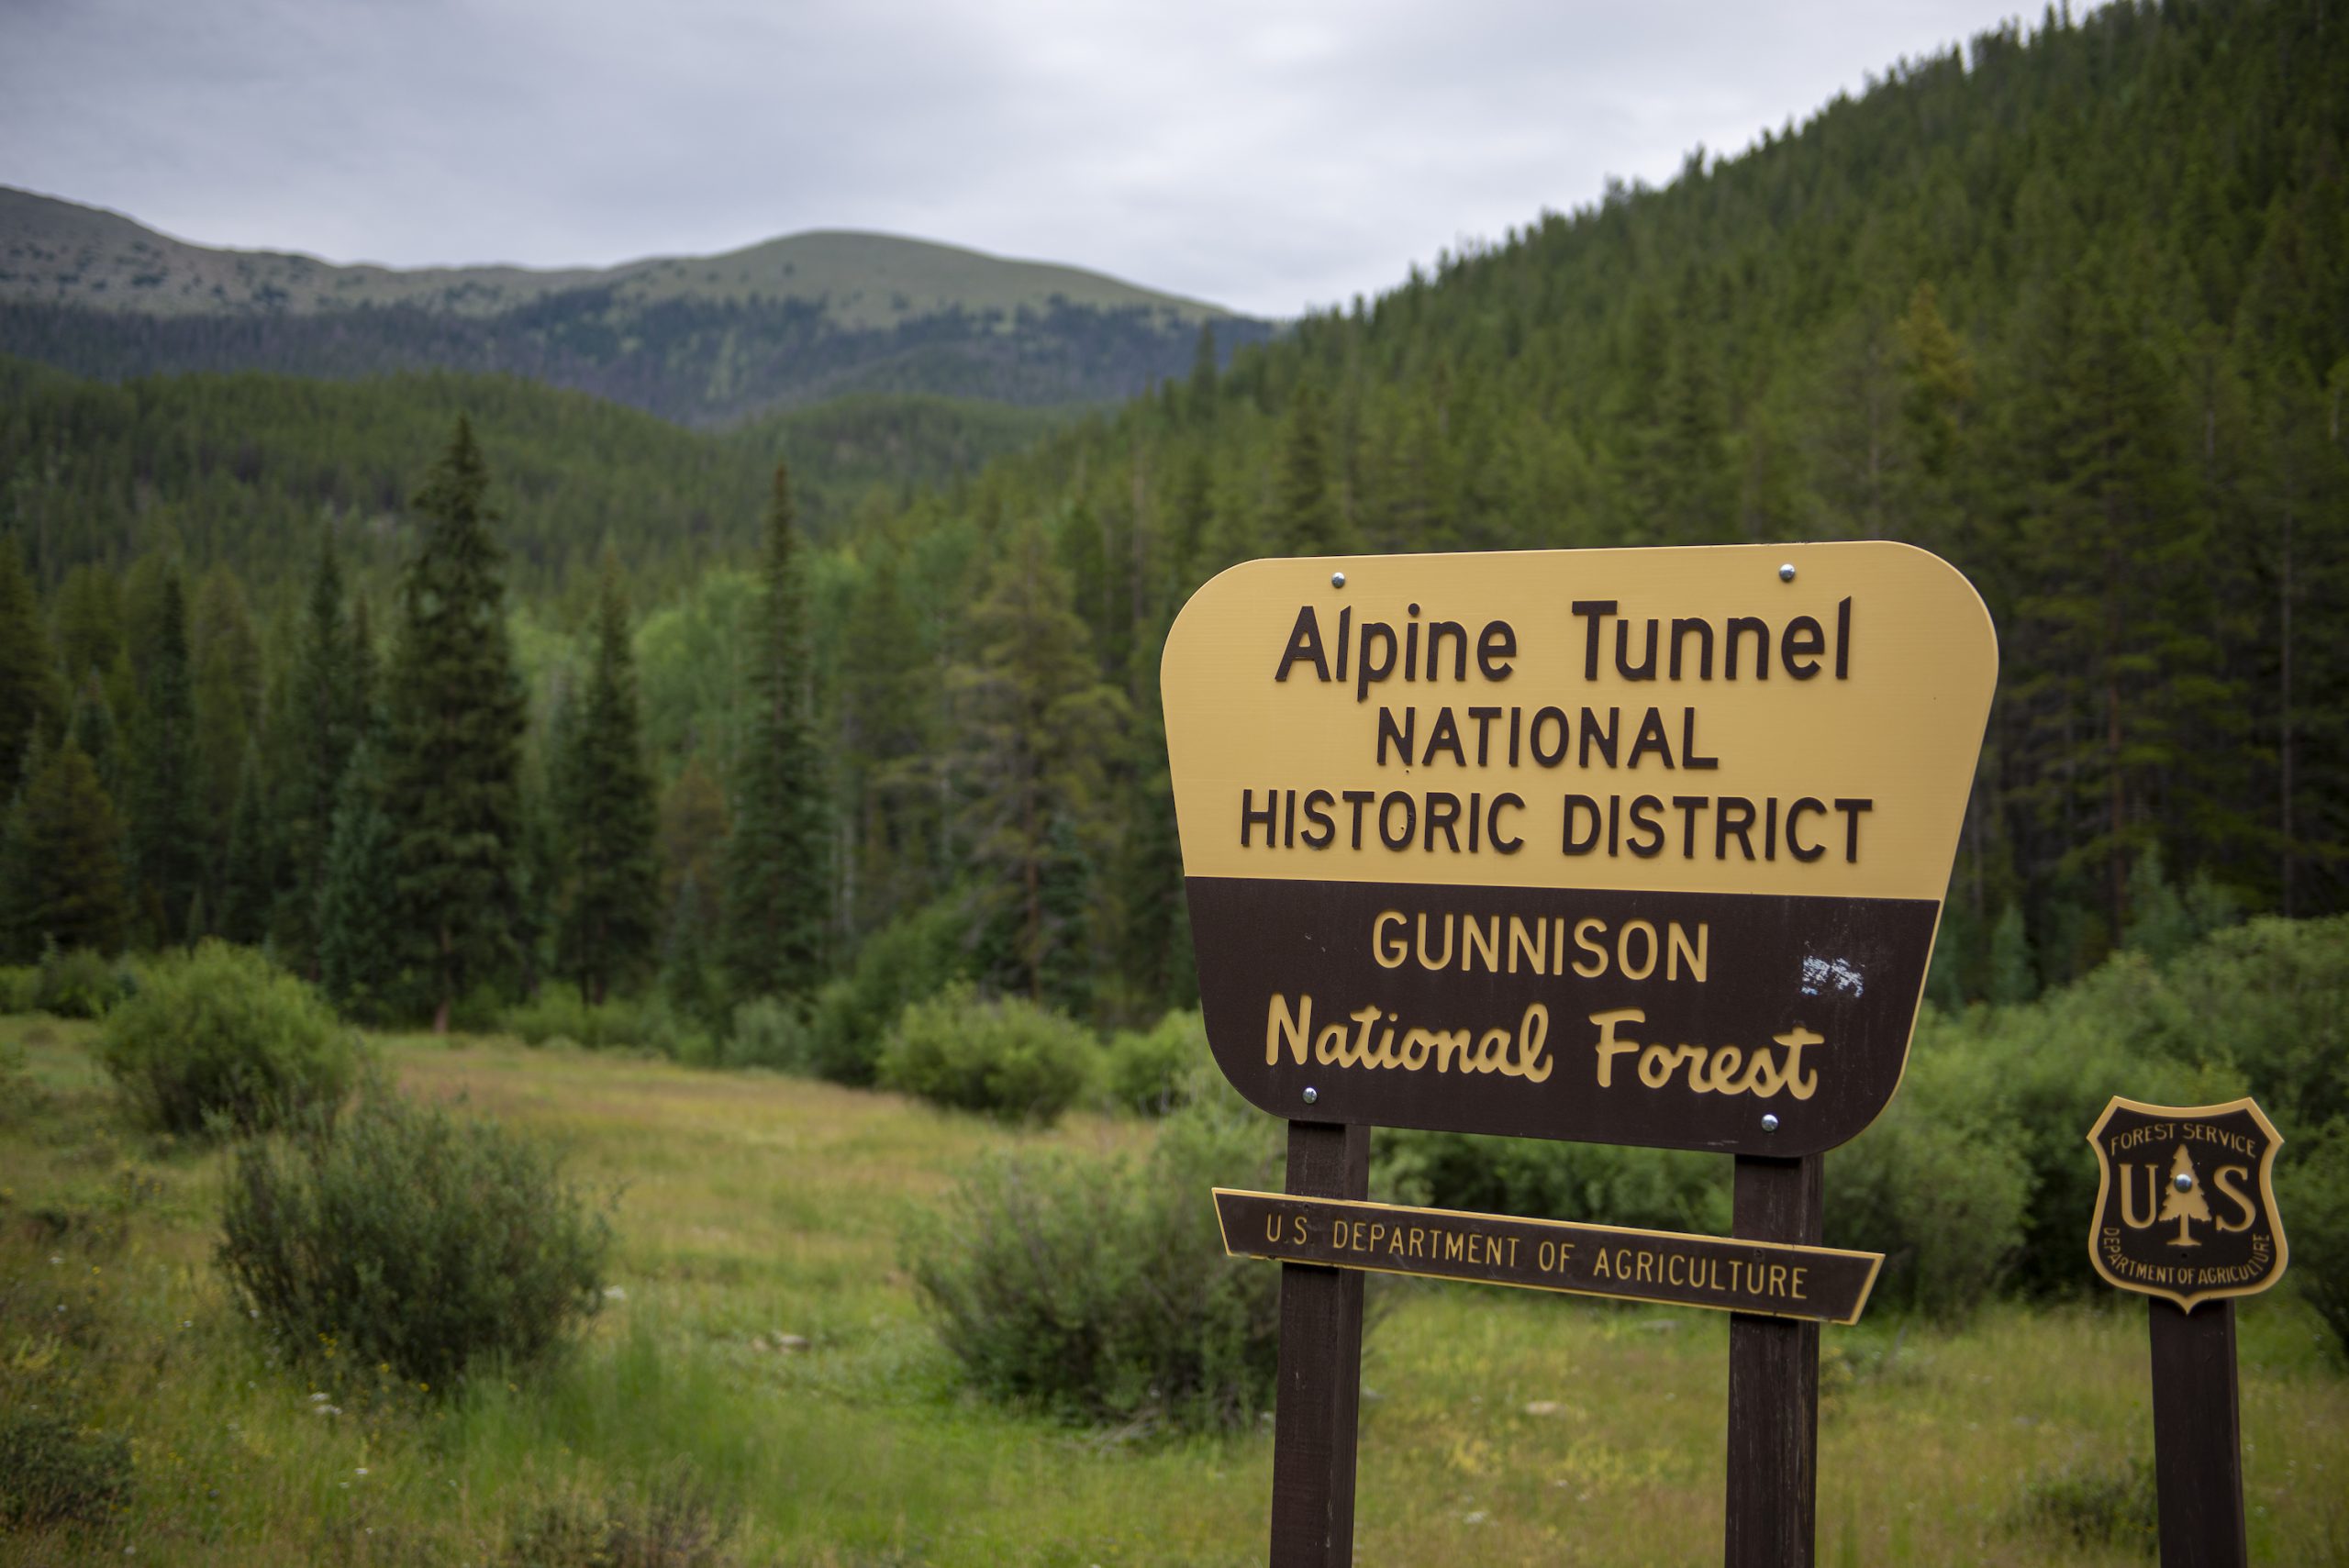 A sign that says "alpine tunnel national historic district" in Pitkin, CO